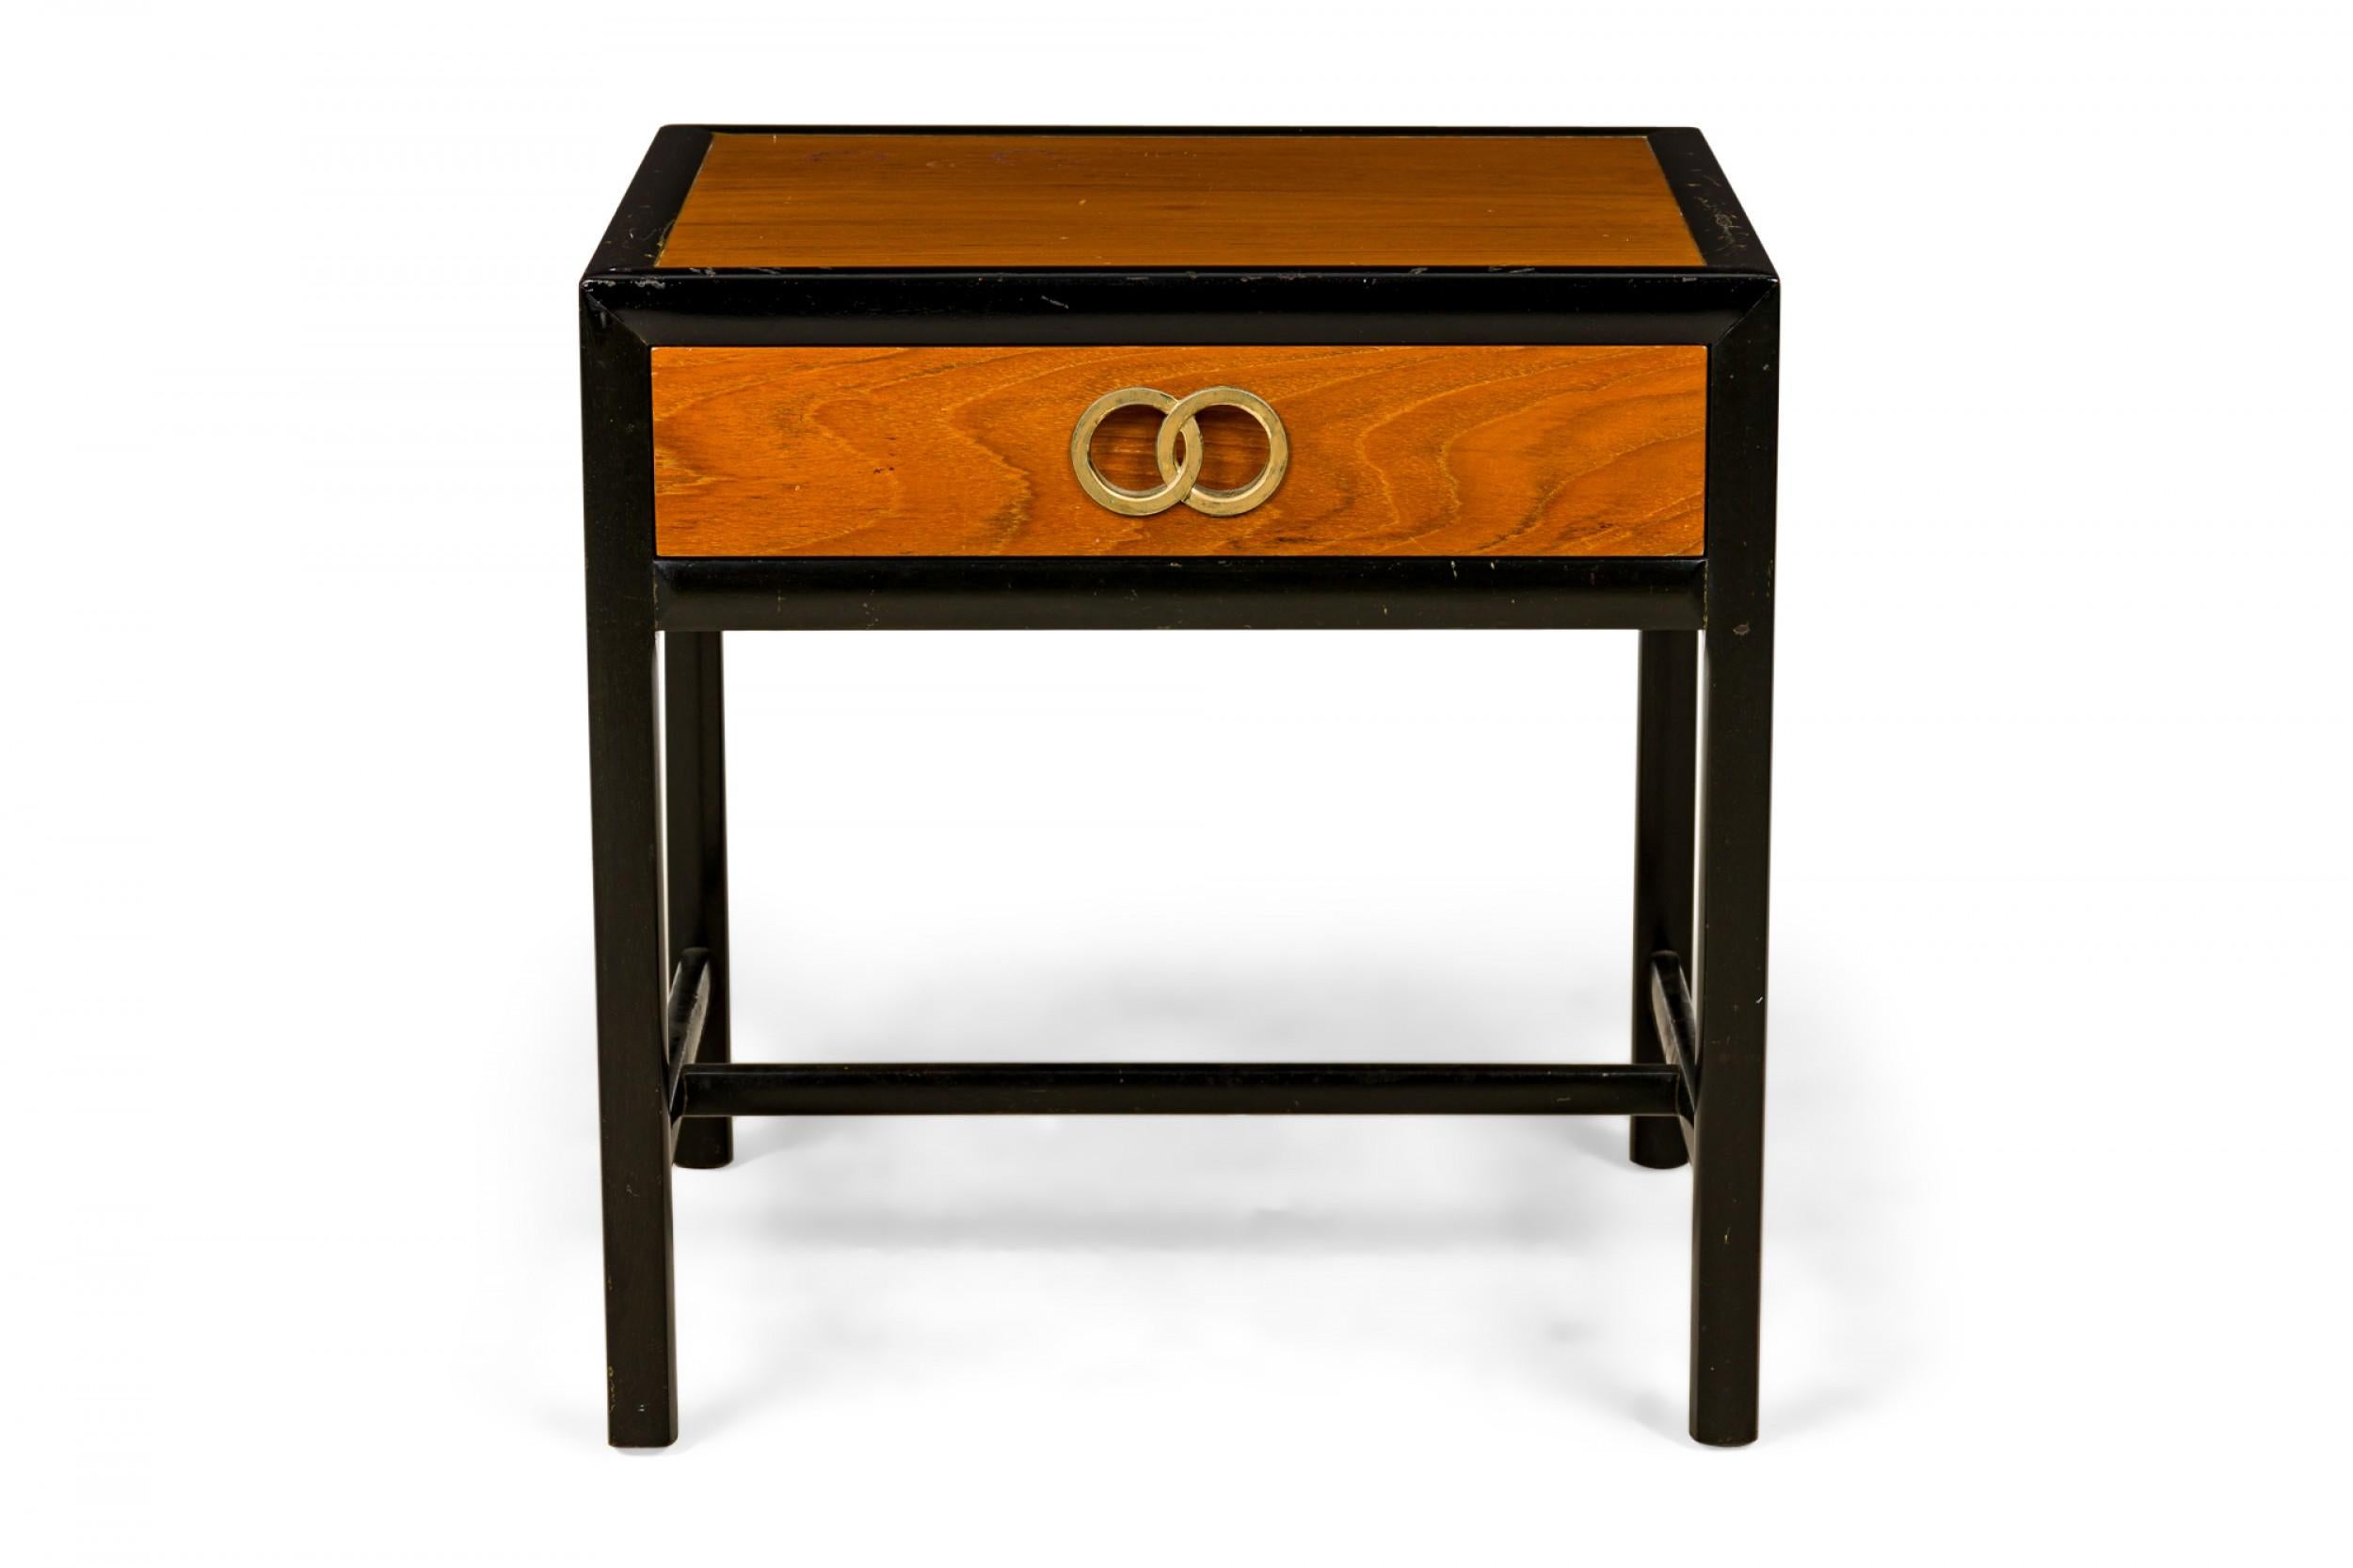 American Mid-Century rectangular nightstand / bedside table with a wooden top and drawer front with and interlocking ring design polished brass drawer pull in a black painted and lacquered frame with a stretcher base. (Michael Taylor for Baker